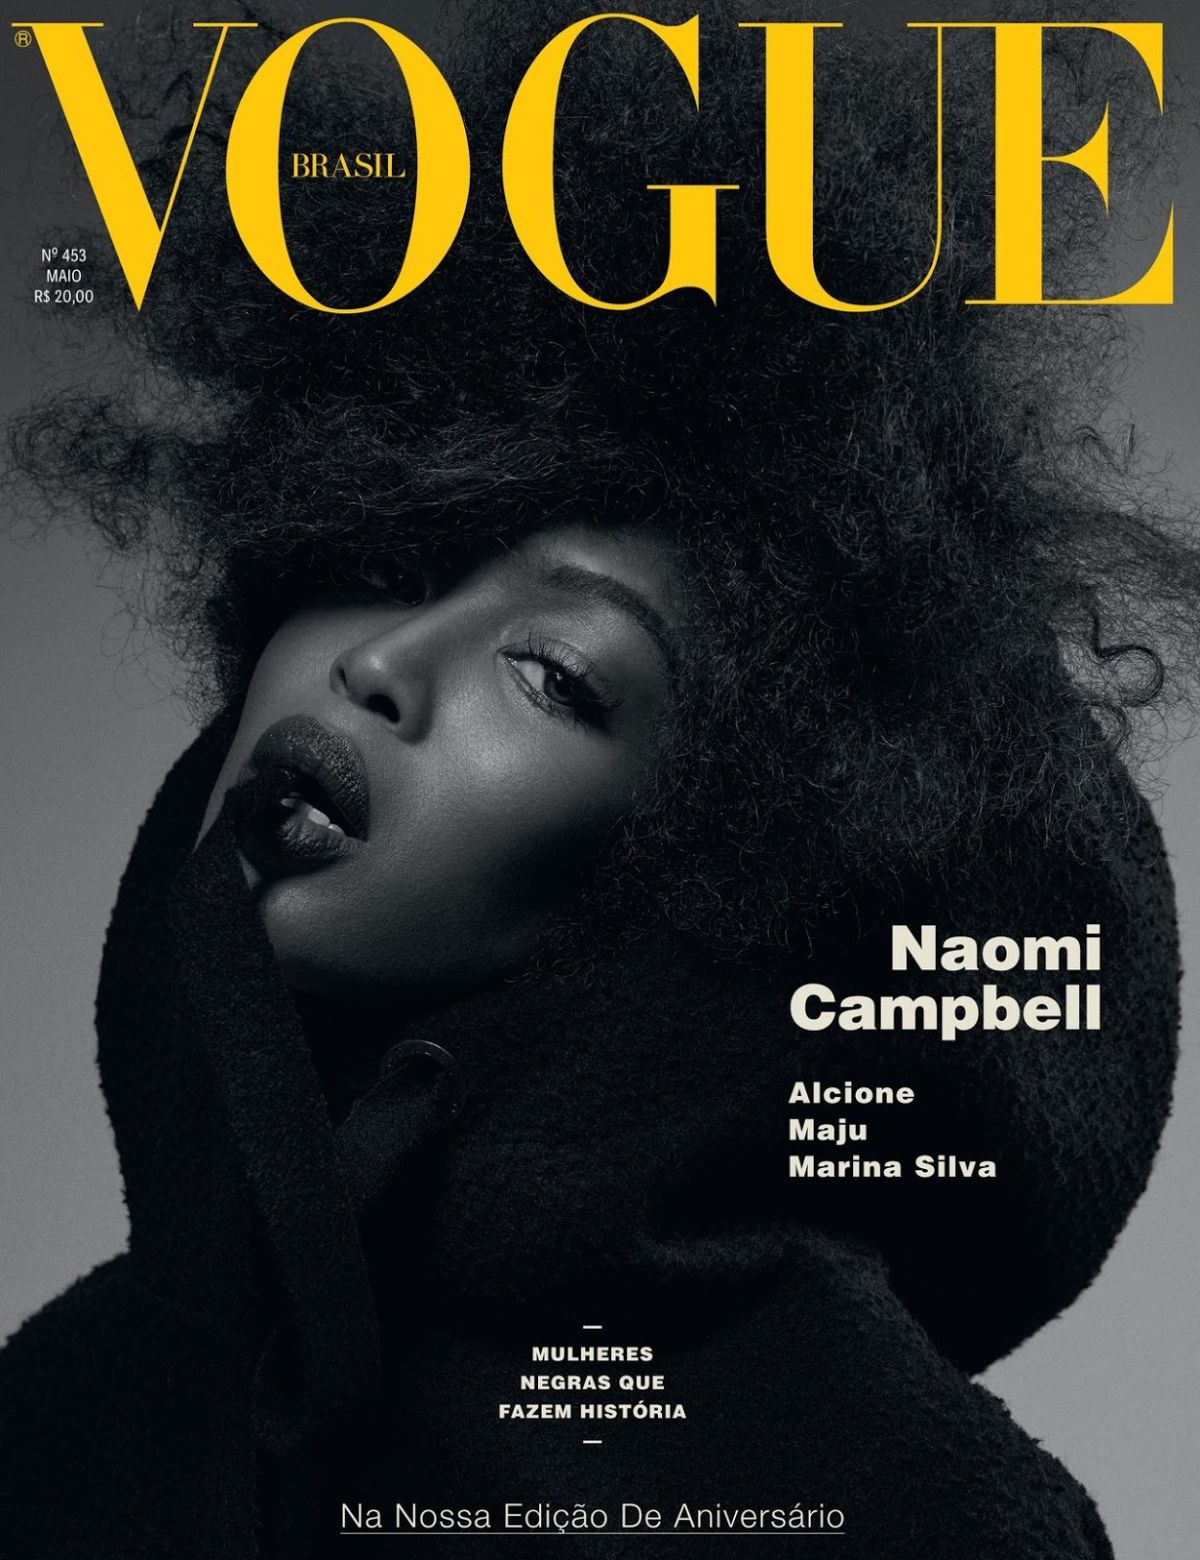 Naomi Campbell Covers Vogue Brazil May 2016